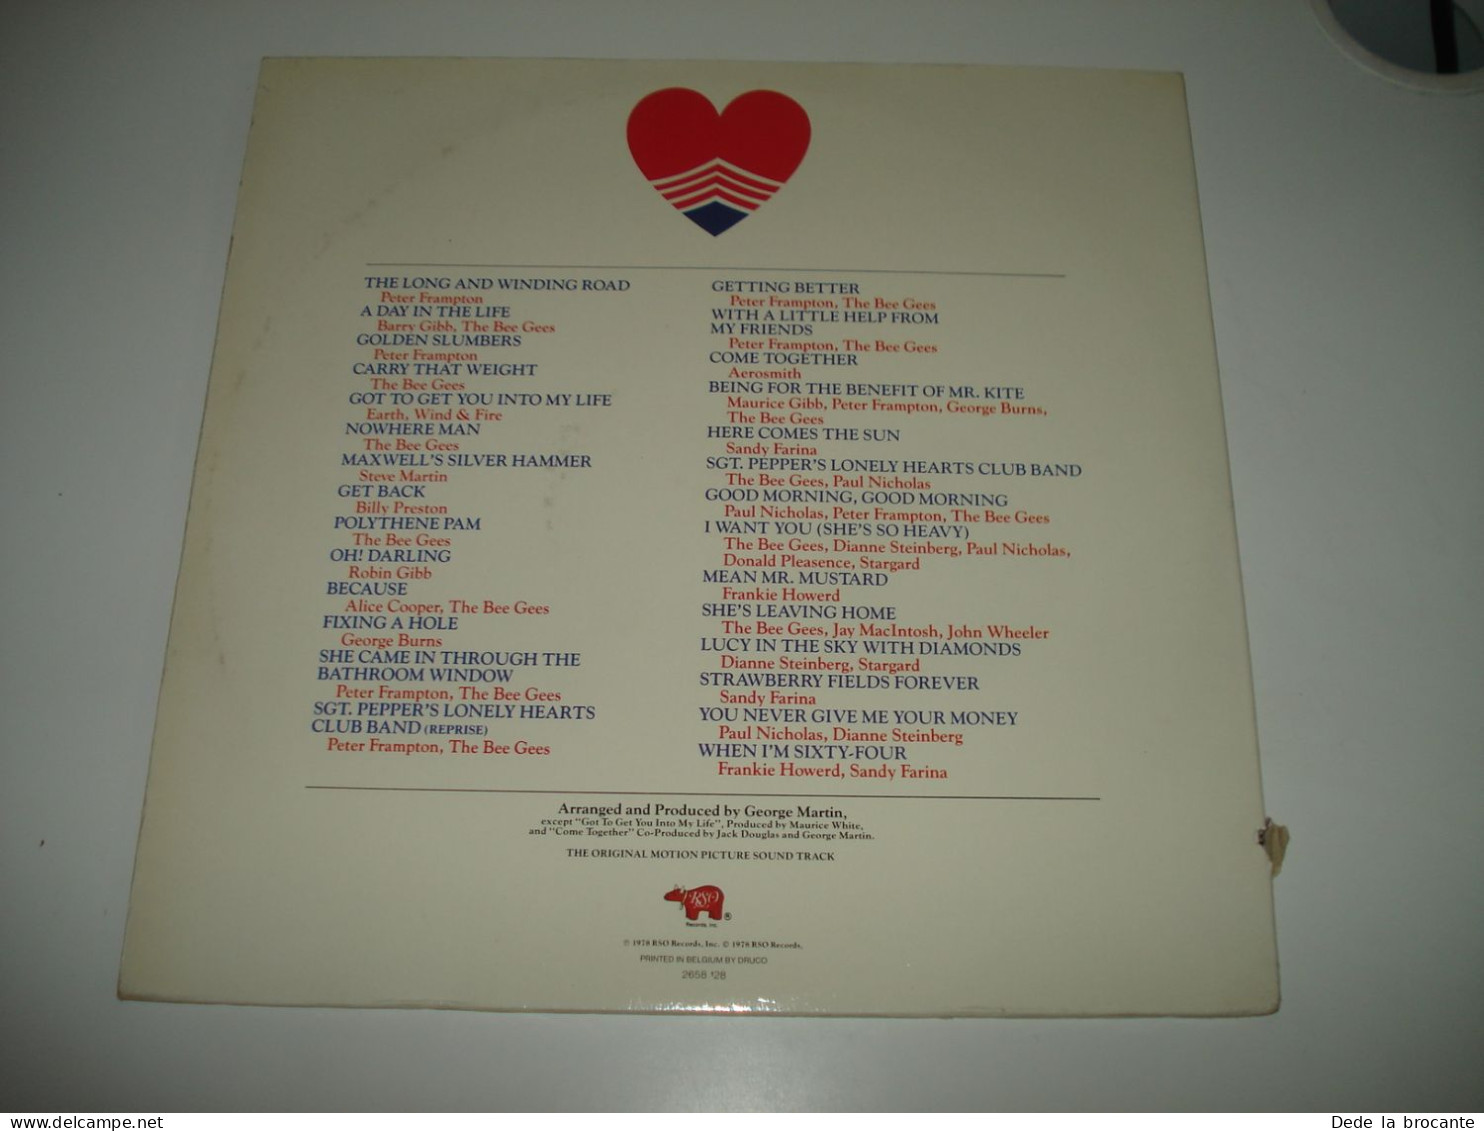 B8 / Sgt Pepper's Lonely Hearts Club Band  Bee Gees - 2658 128 - BE 1978 - M/VG+ - Musica Di Film